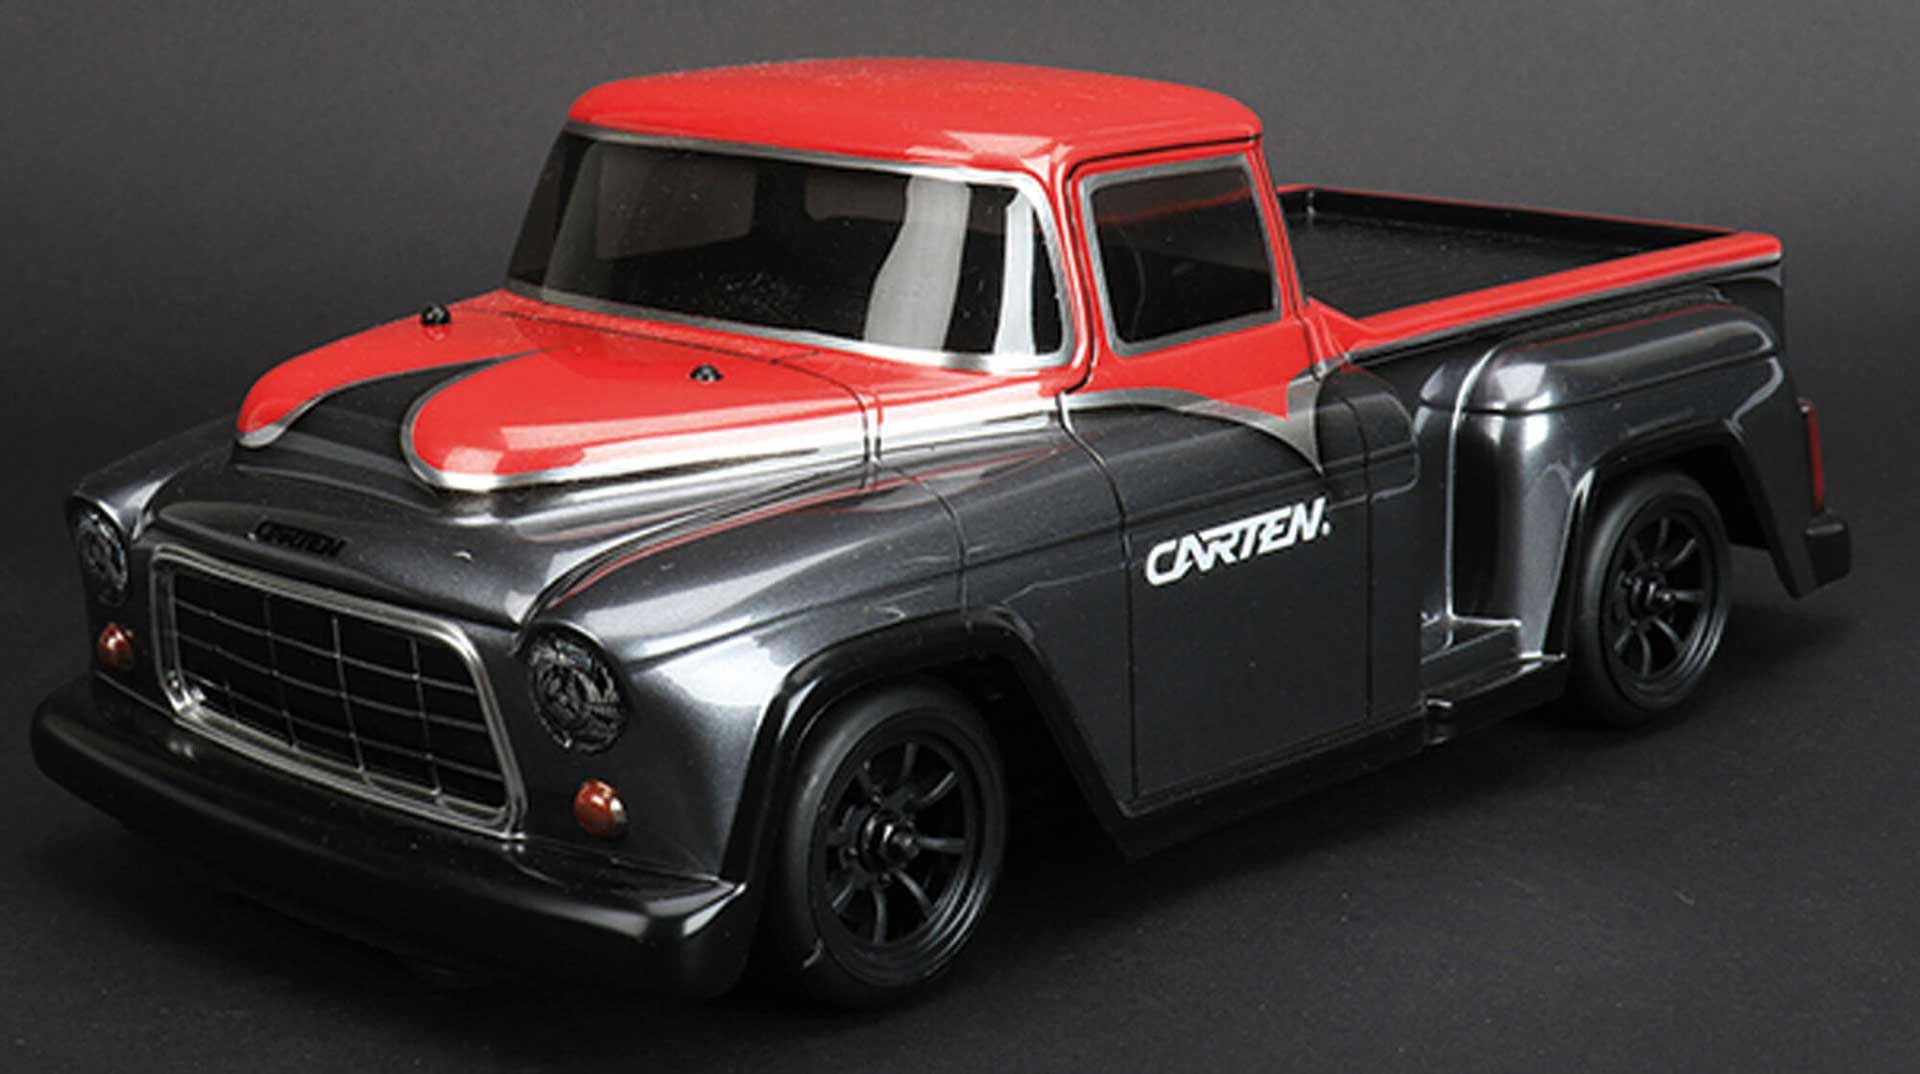 CARTEN CHEVY Pick Up 1/10 M-ChassisBody unpainted